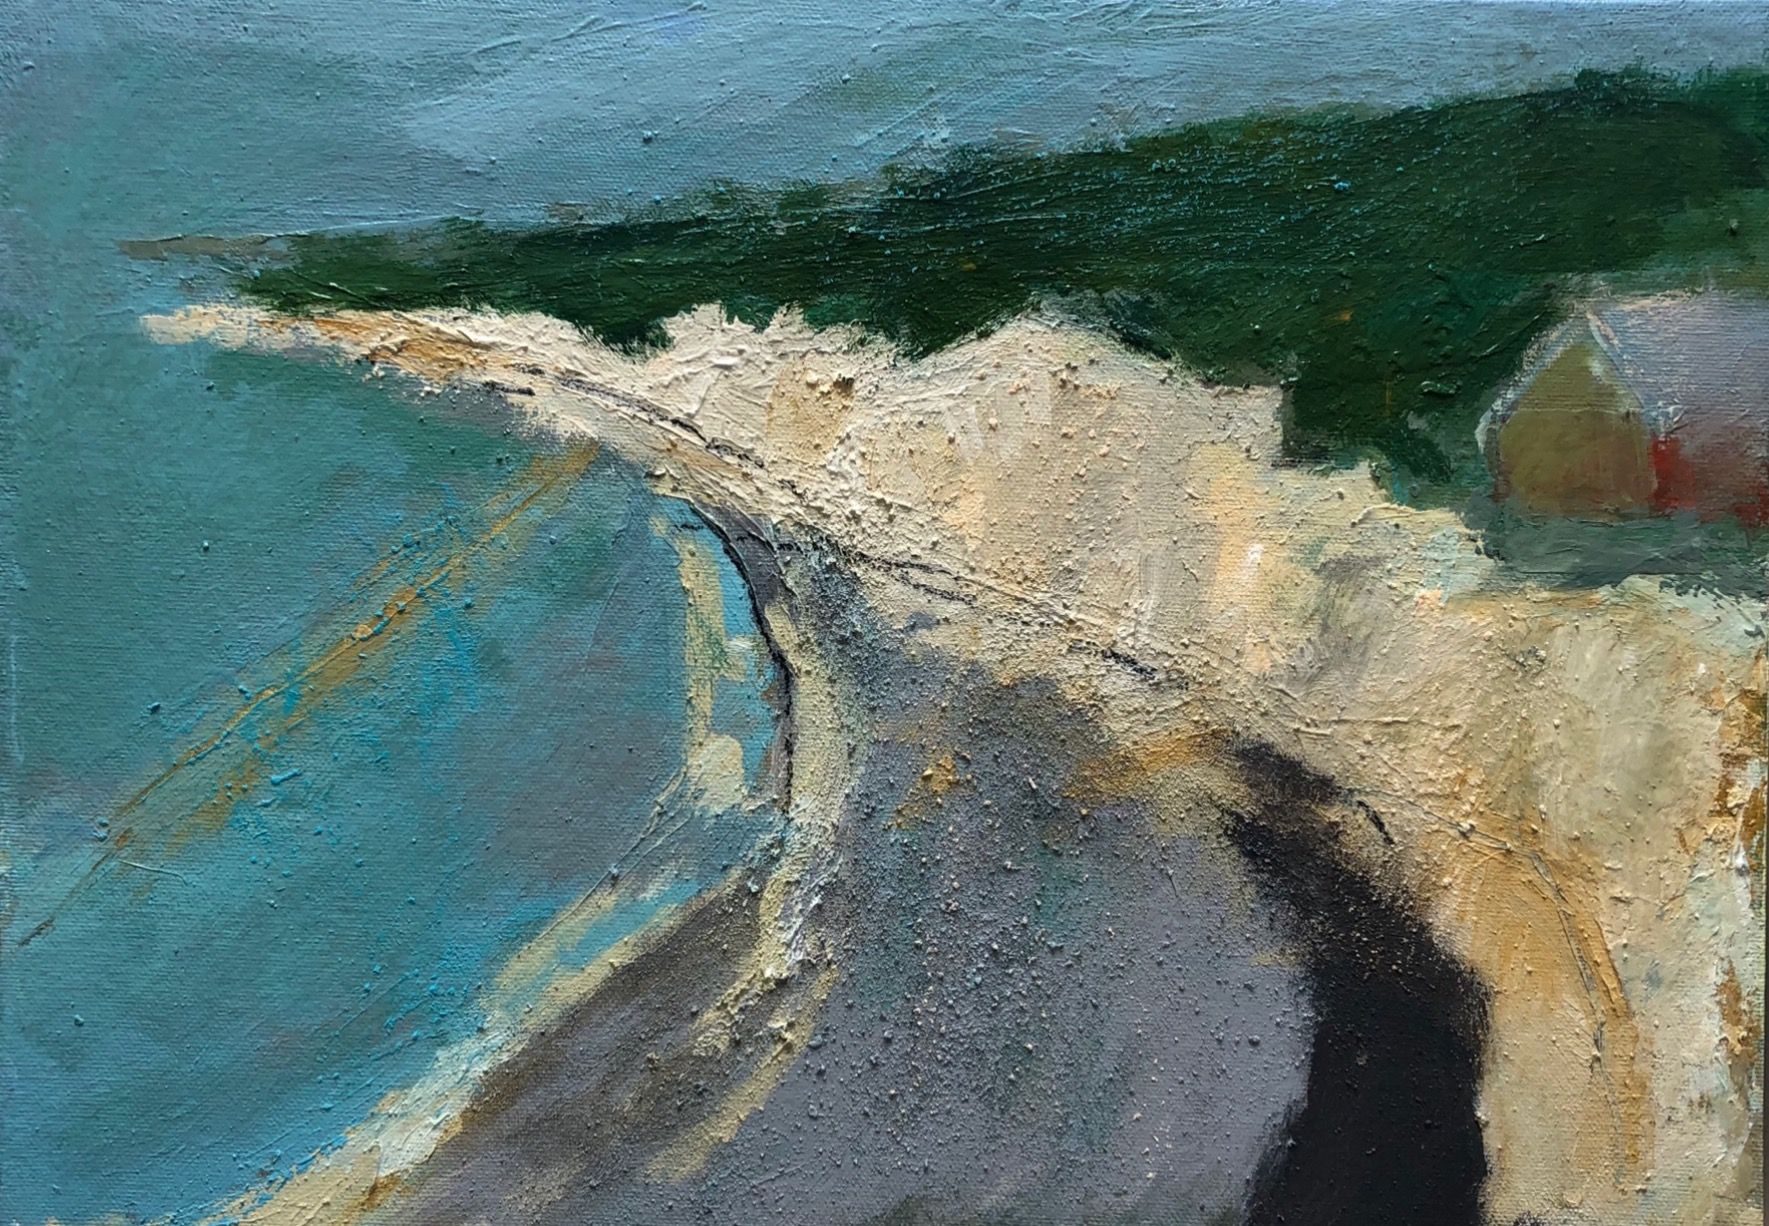 Birling gap by Maggie LaPorte-Banks